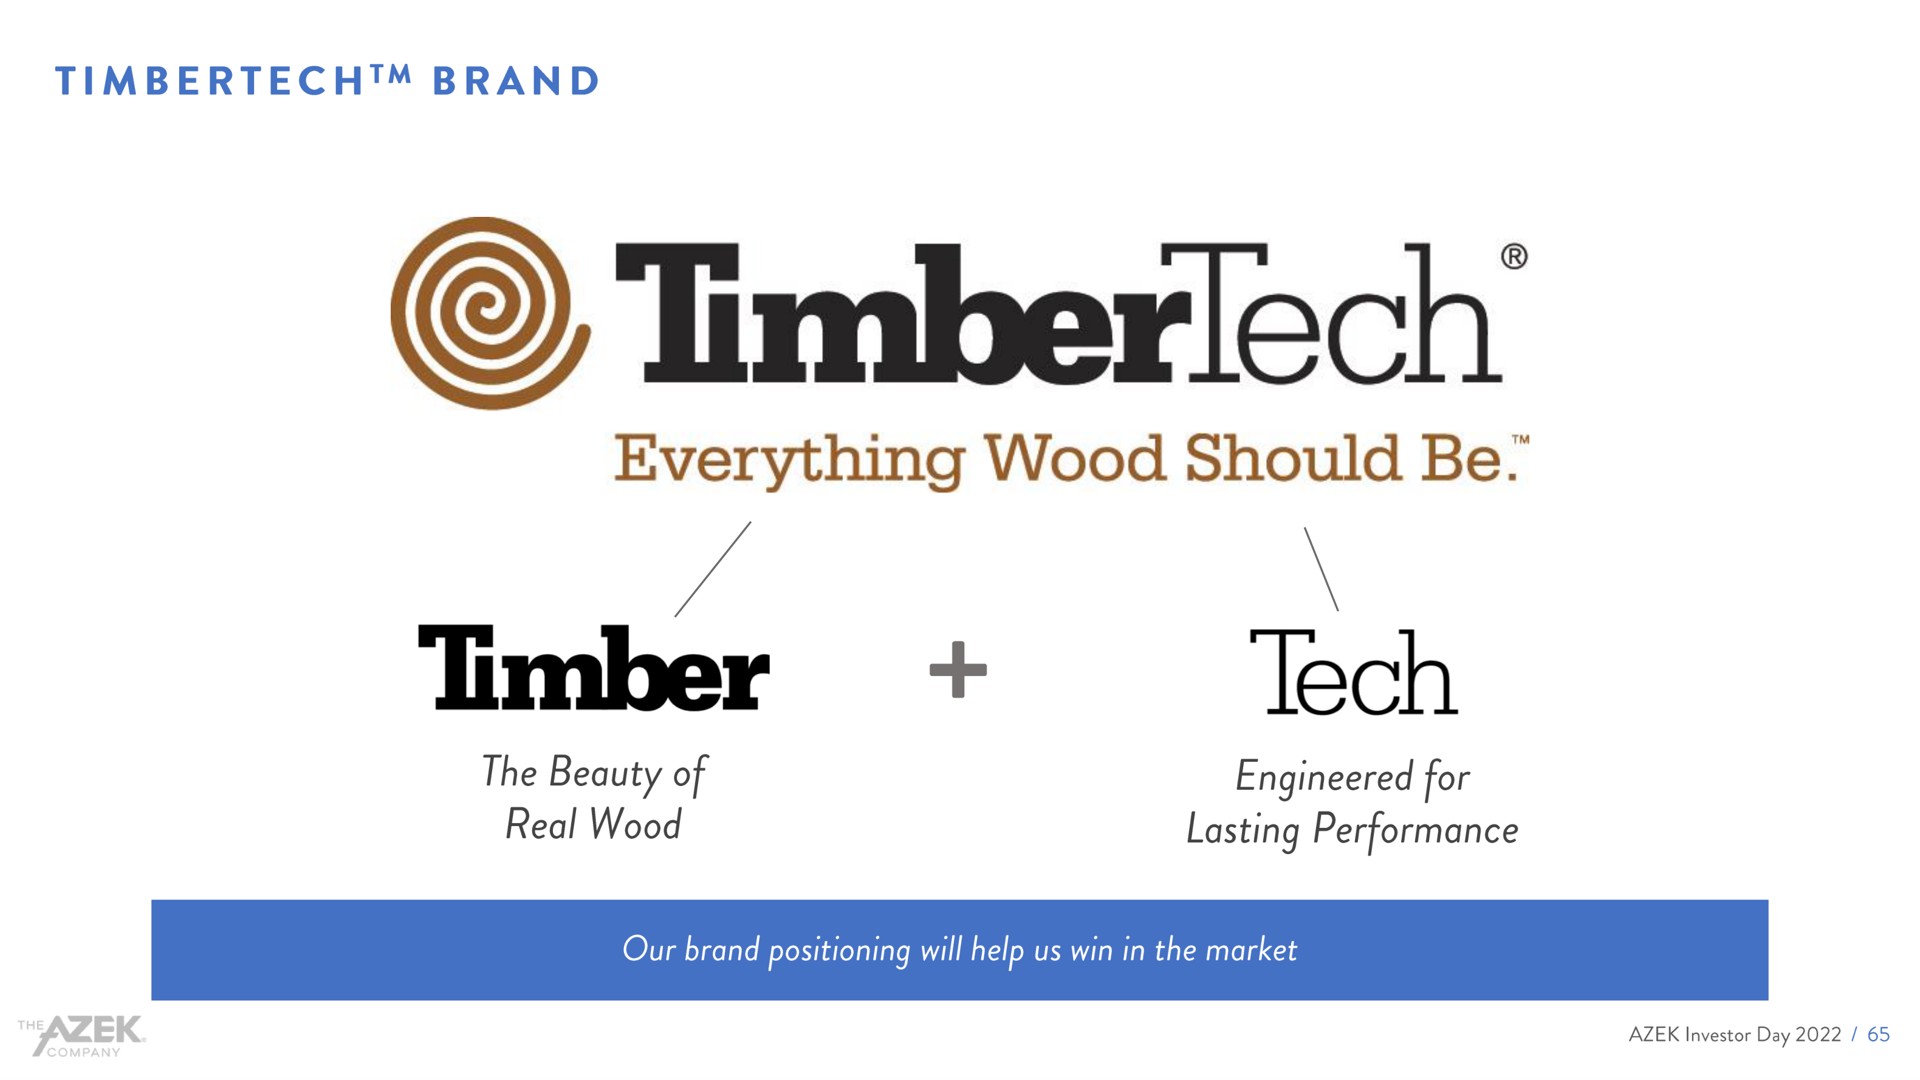 brand everything wood should be timber the beauty of real wood tech engineered for lasting performance | Azek